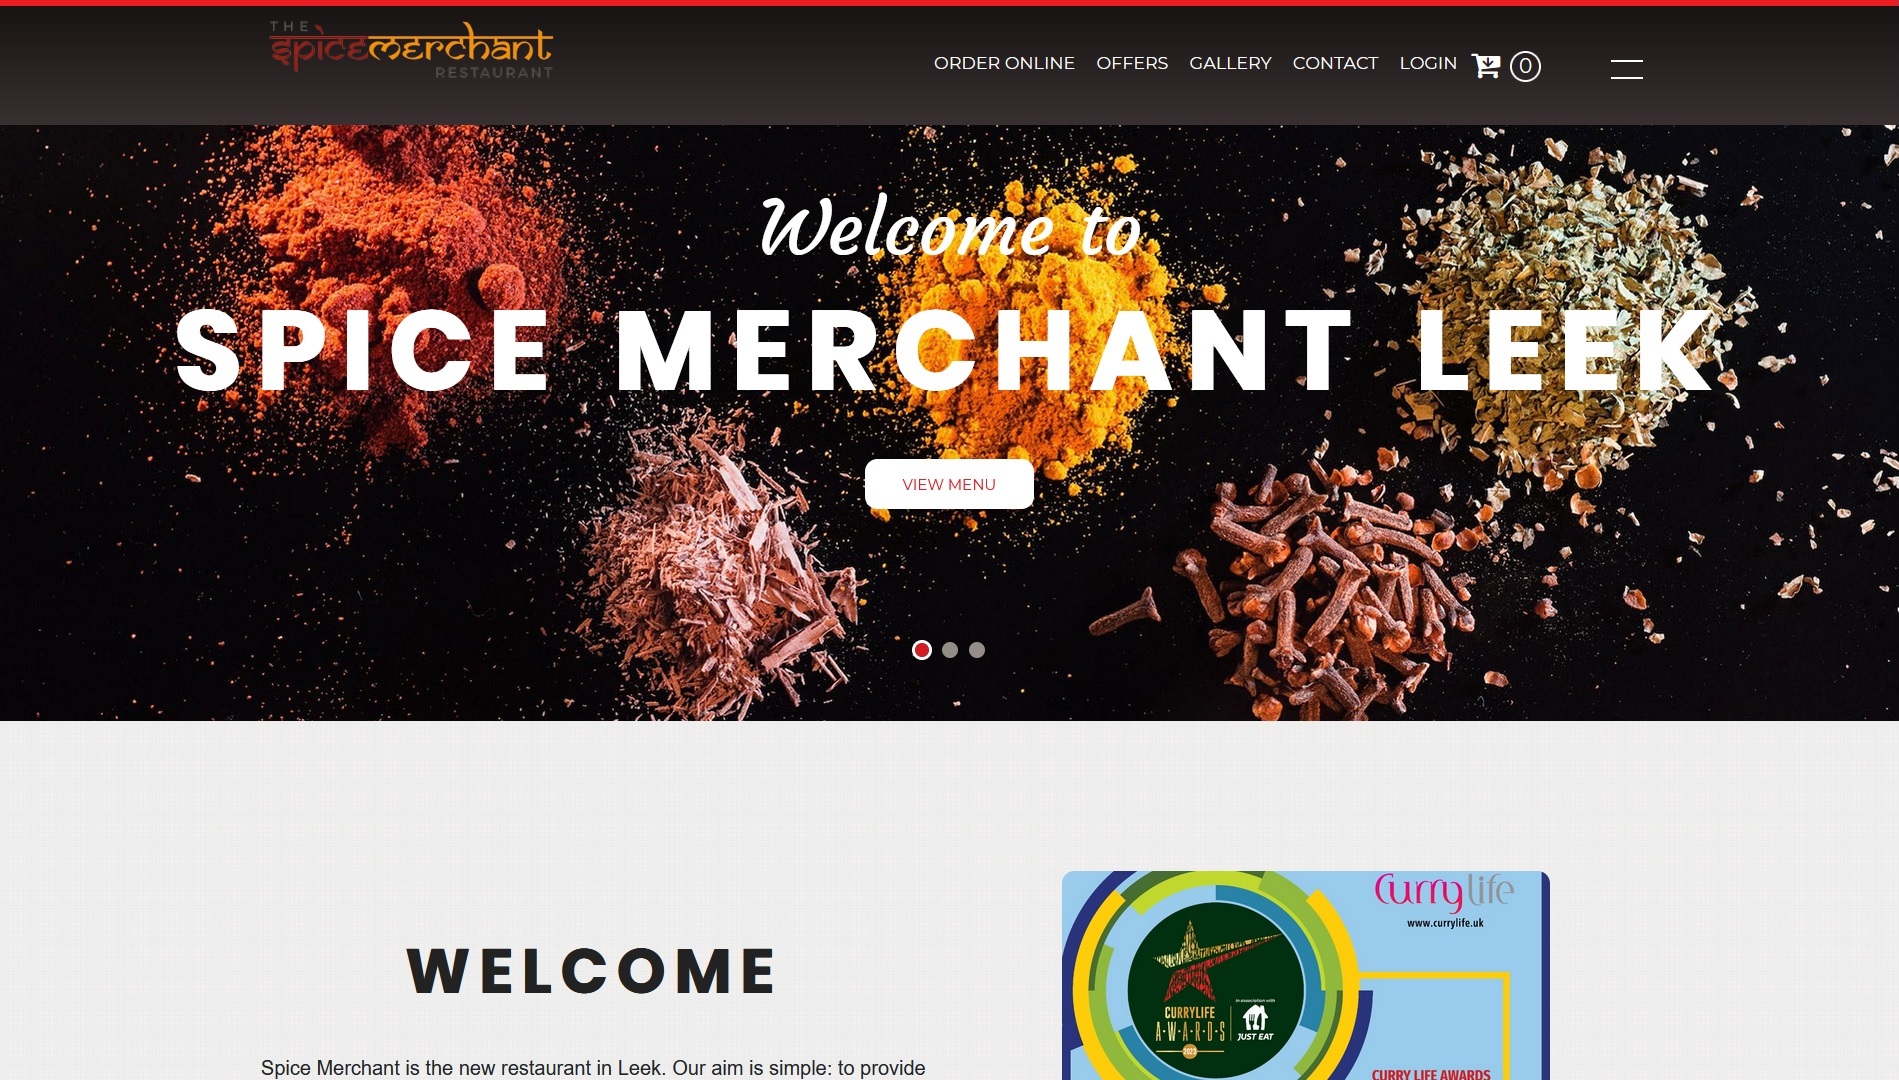 image of the Spice Merchant website